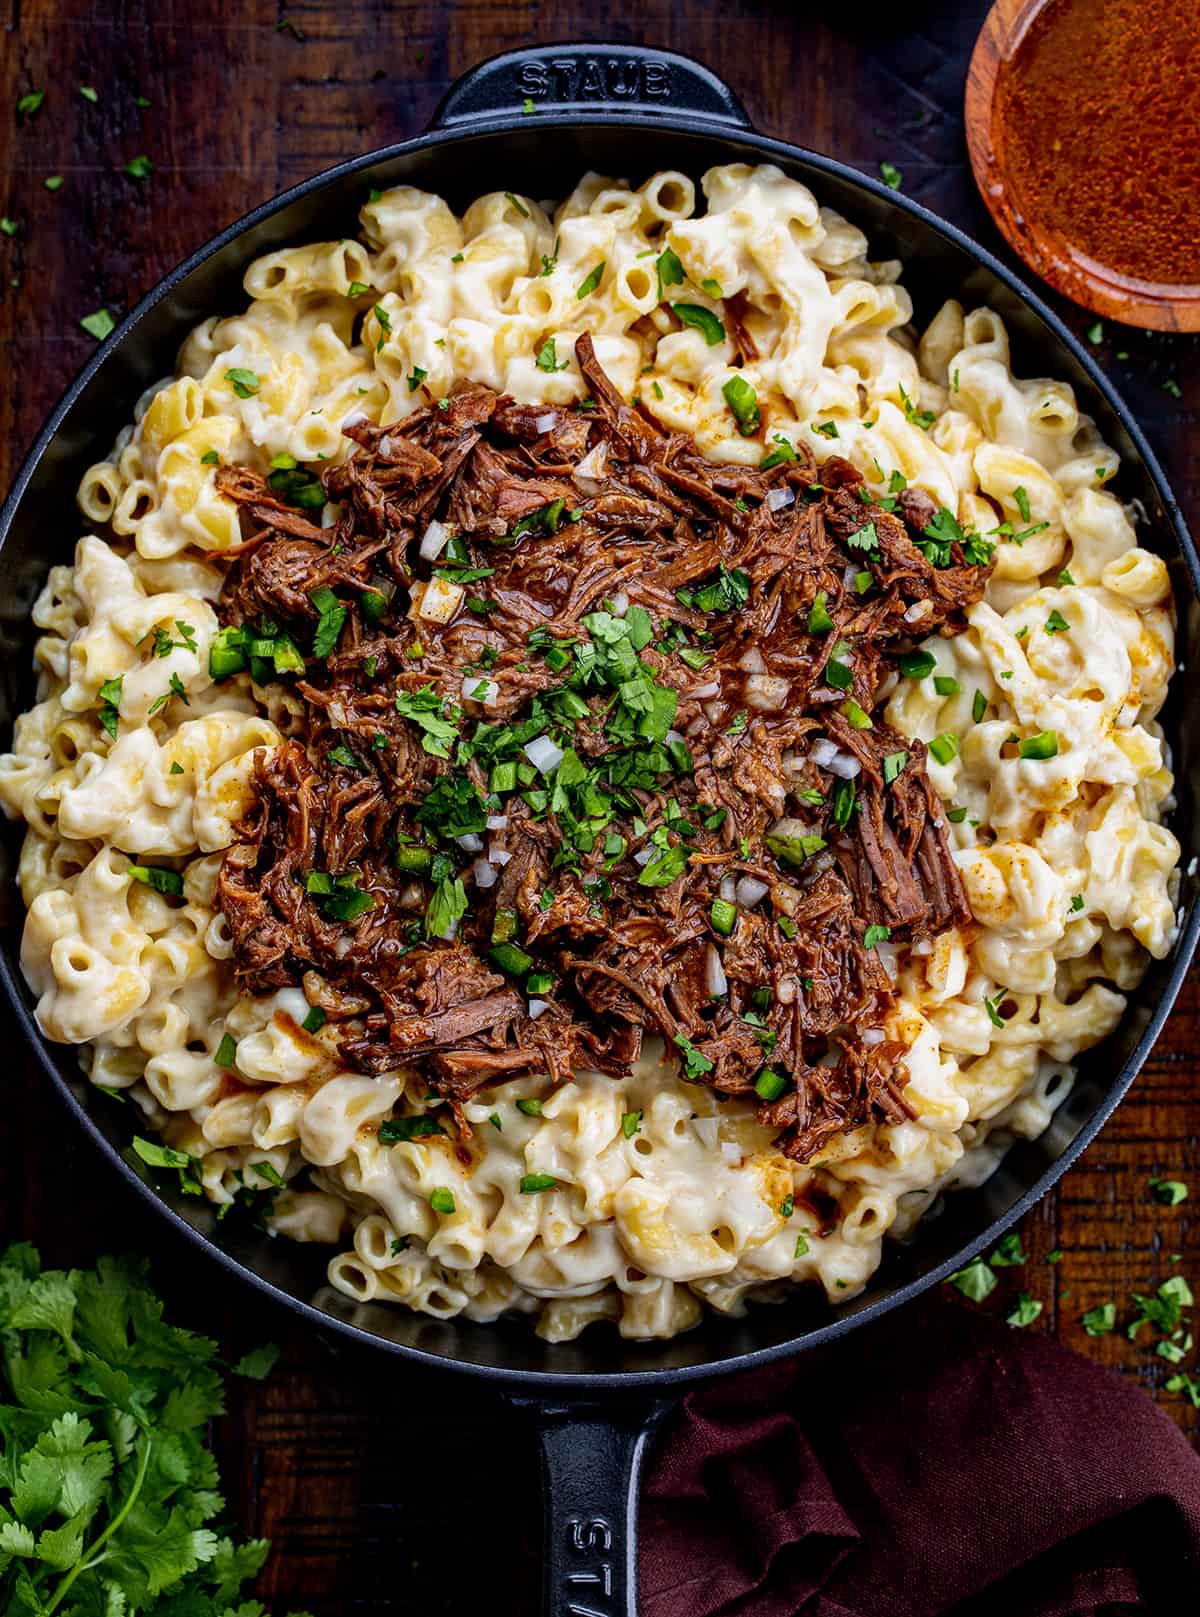 Skillet of Shredded Beef Macaroni and Cheese on a Cutting Board.